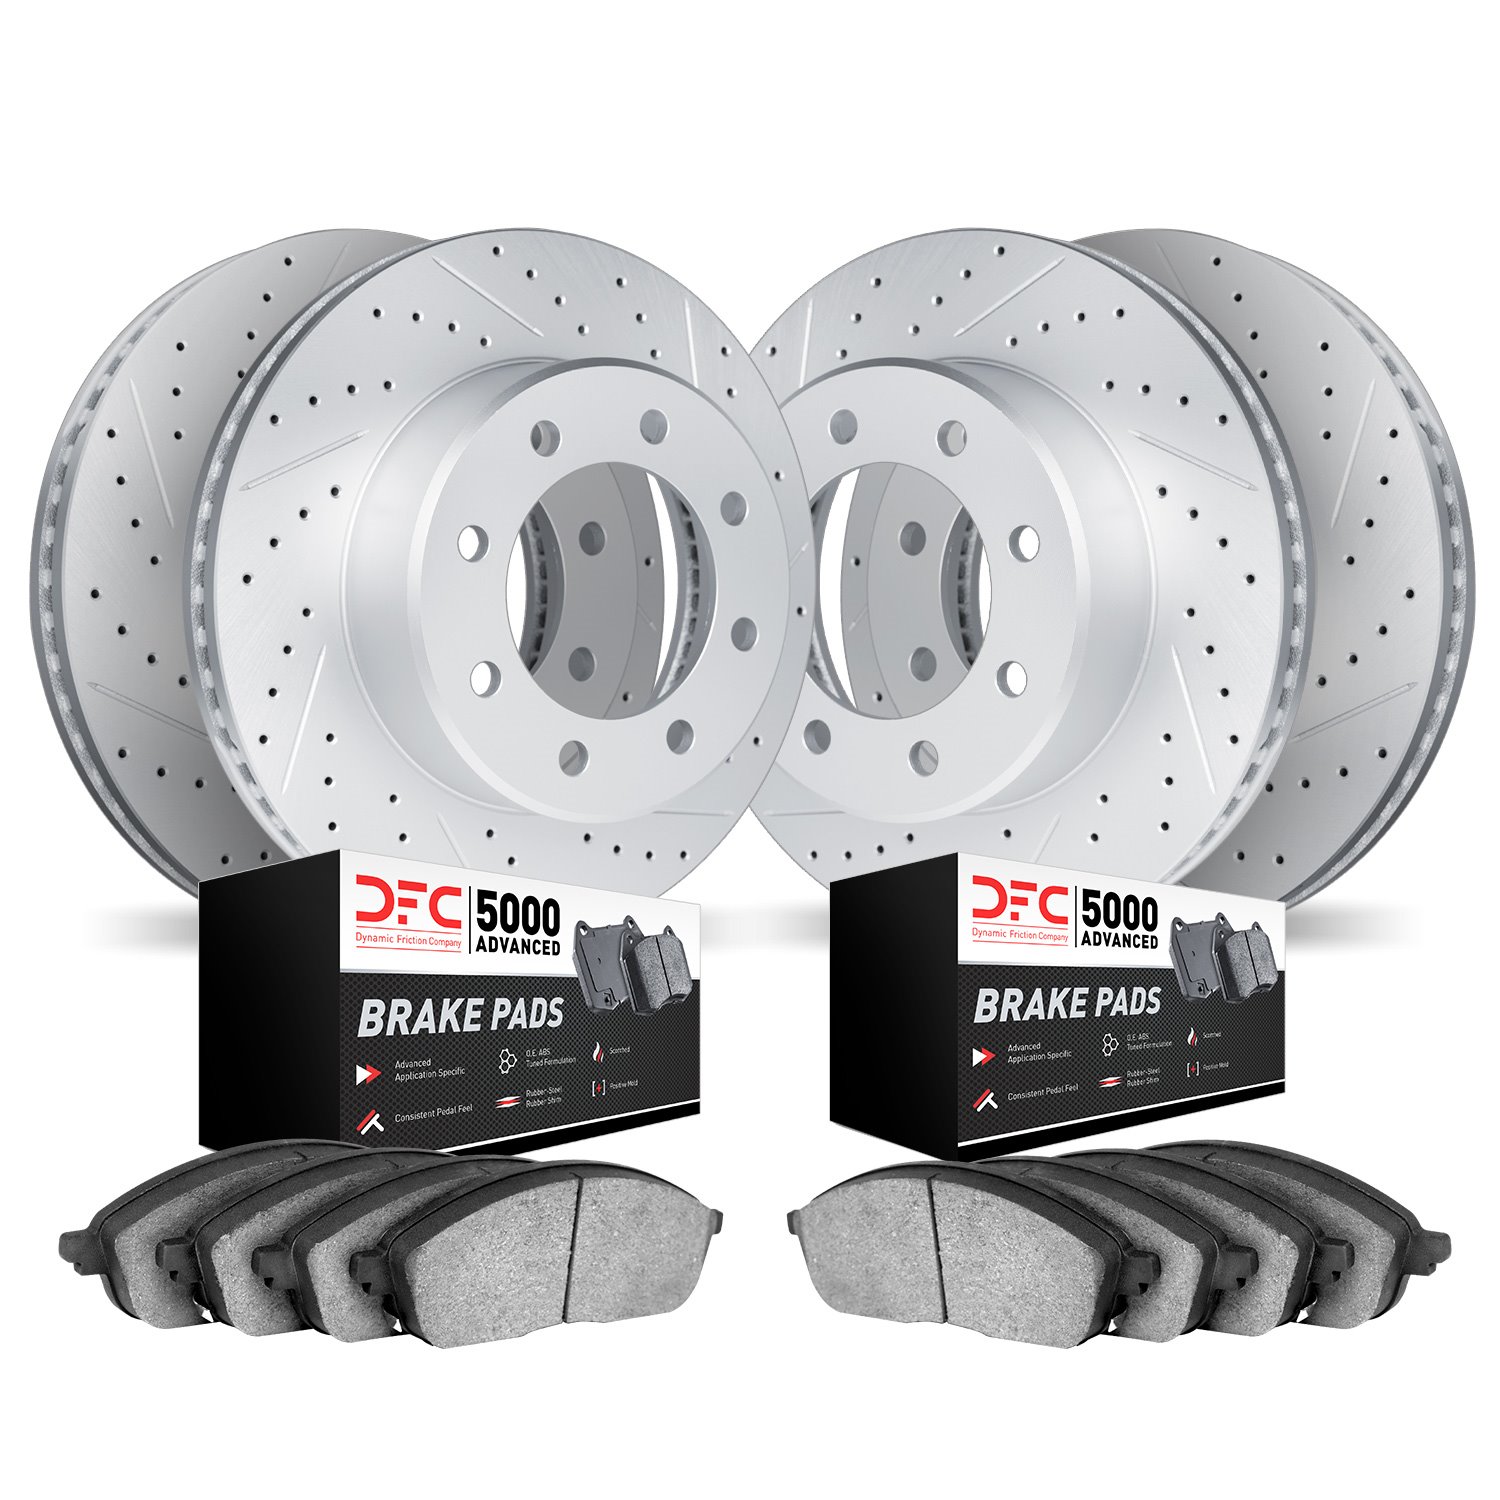 2504-54275 Geoperformance Drilled/Slotted Rotors w/5000 Advanced Brake Pads Kit, 2010-2012 Ford/Lincoln/Mercury/Mazda, Position: